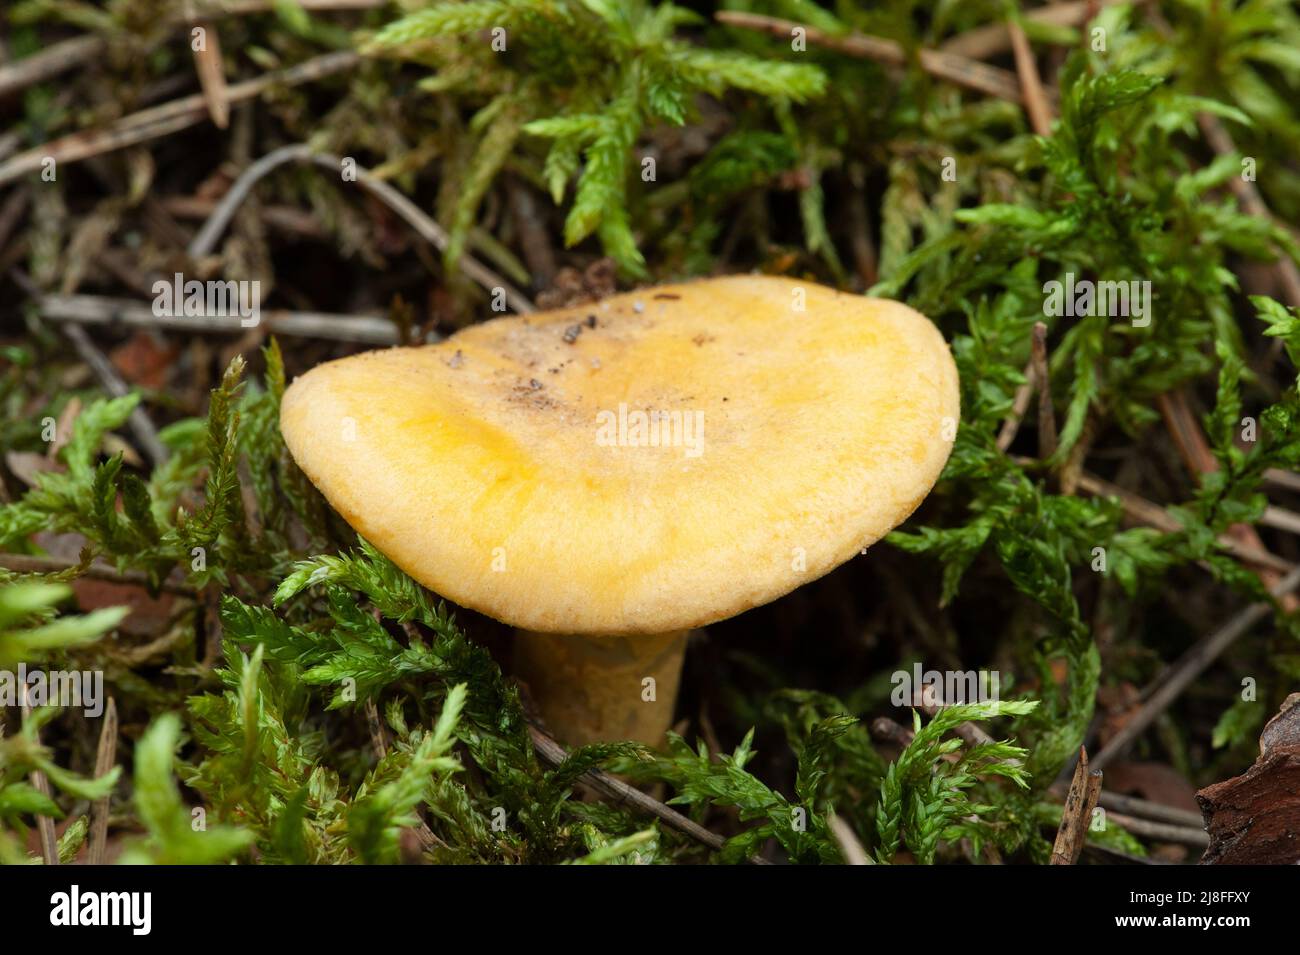 Wildlife of Europe - edible and inedible mushrooms growing in forest Stock Photo